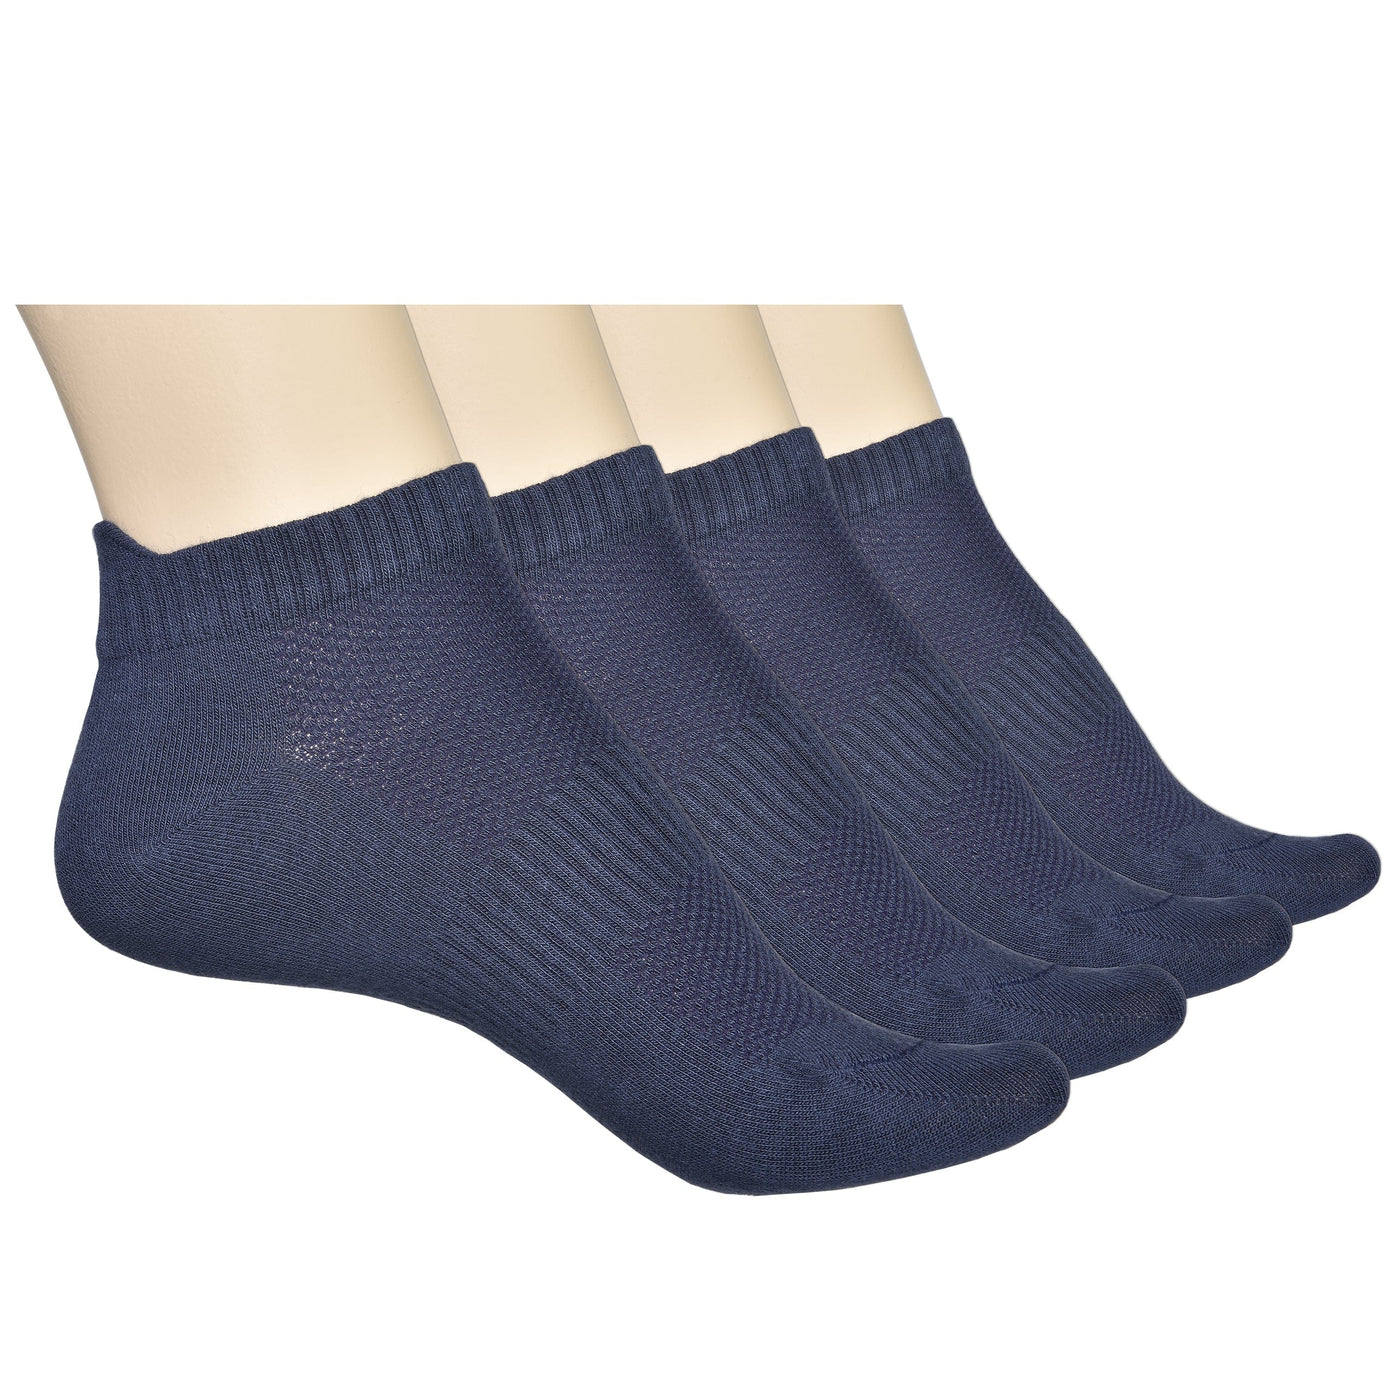 Unisex Ankle Socks - 4 Pairs - Bamboo Low Cut Ankle Breathable Sports Unisex Ankle Socks - 4 Pairs - Bamboo Low Cut Ankle Breathable Sports #color_navy